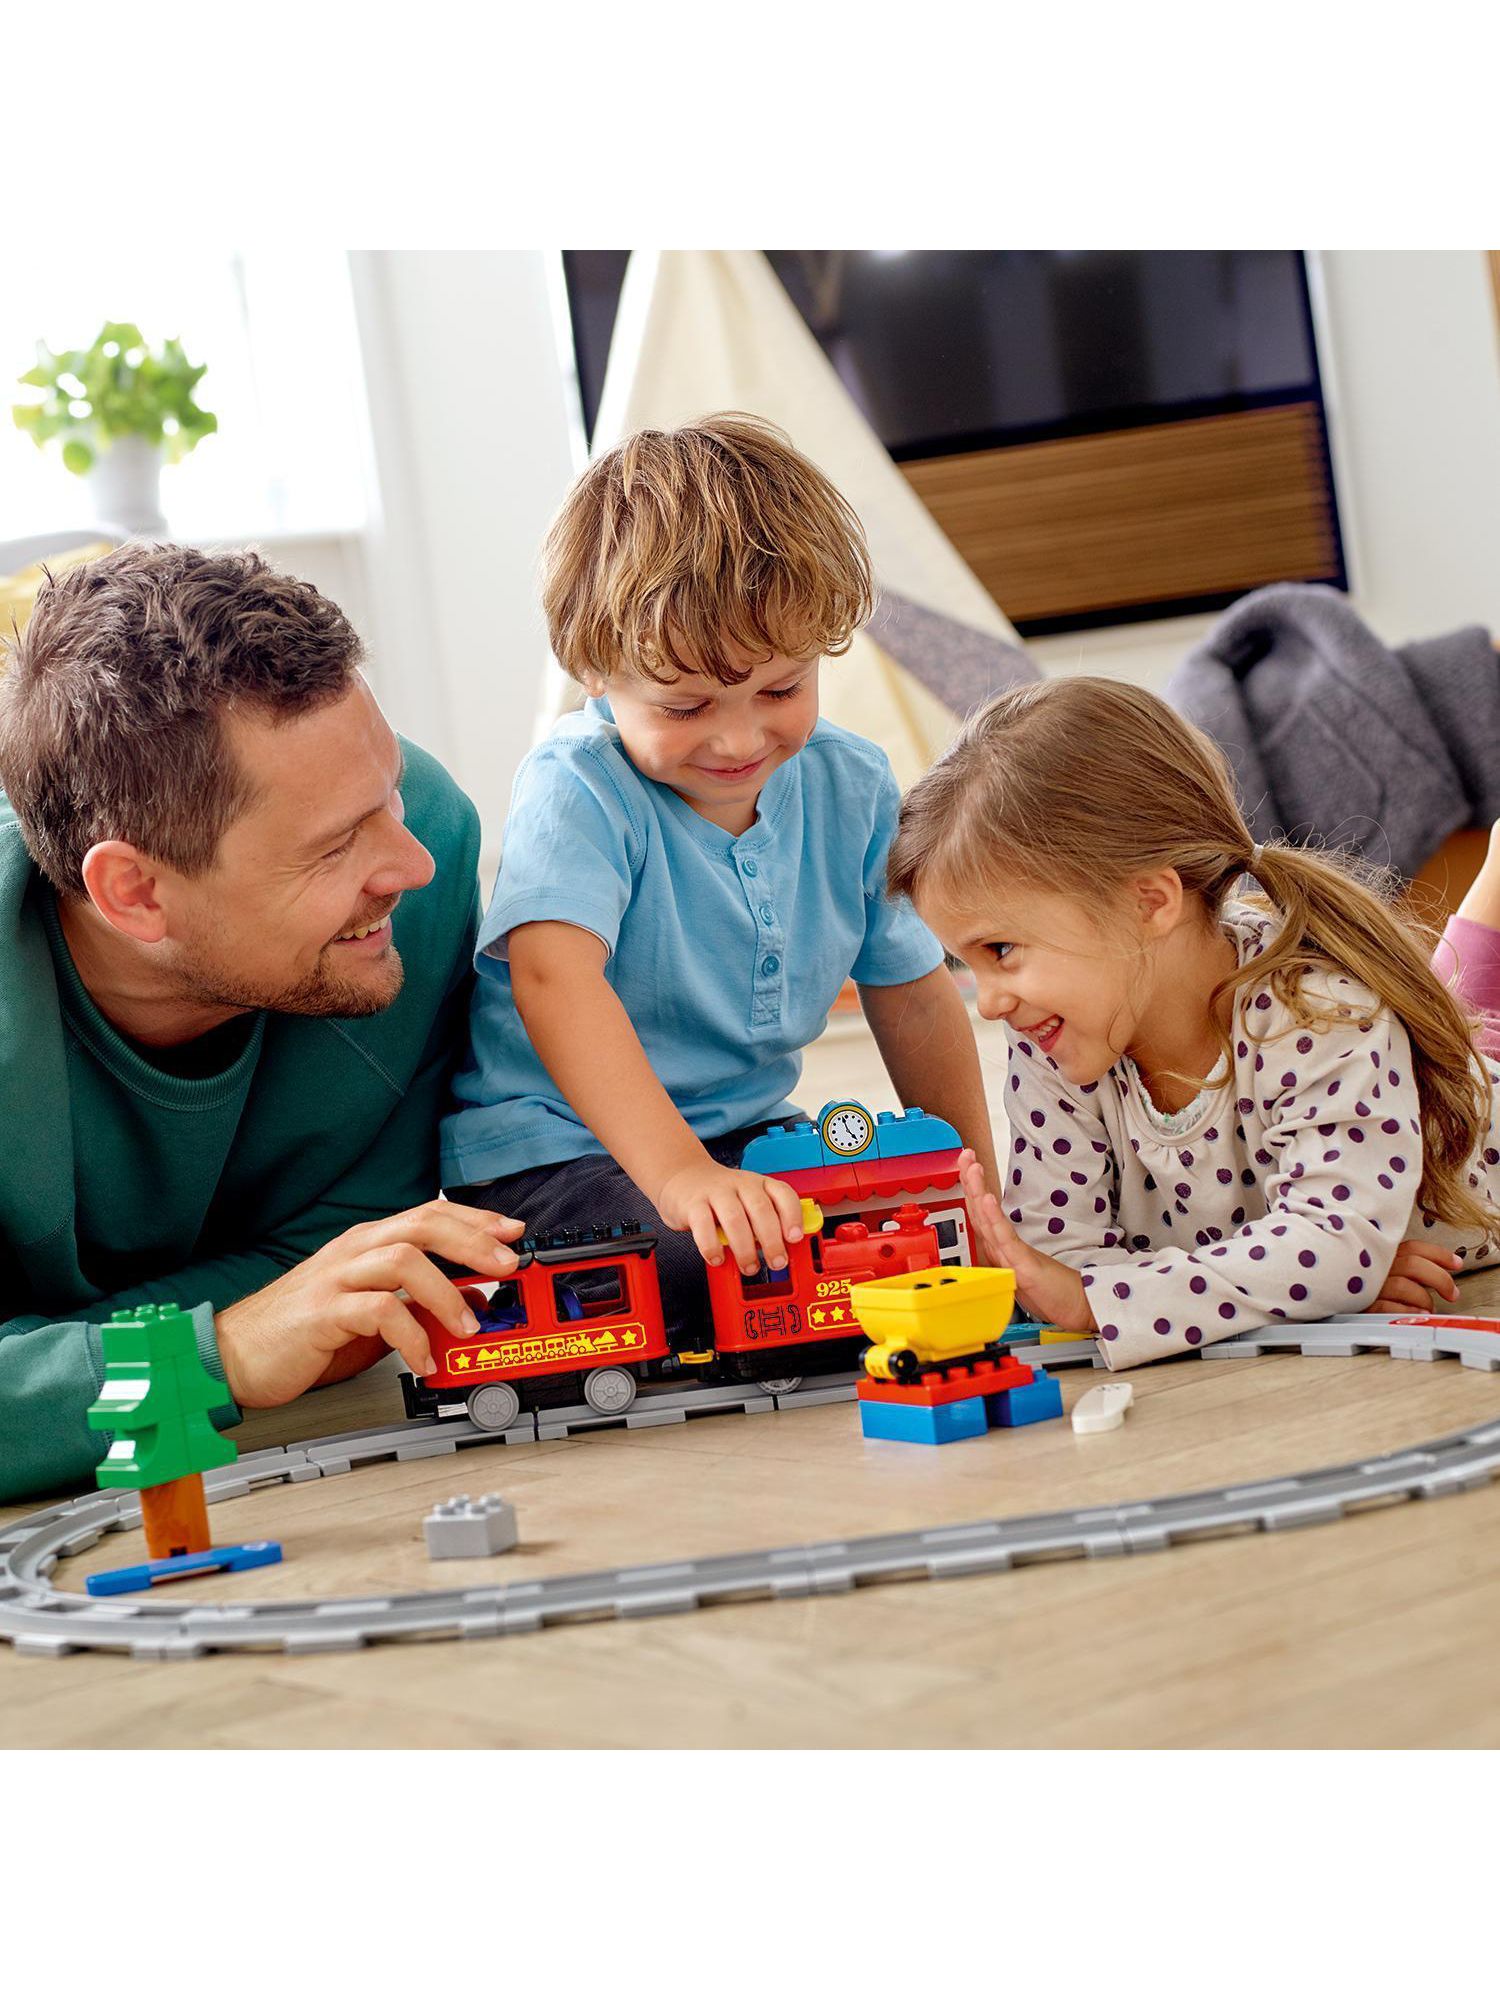 Children's Train & Track Set Toddlers Station Building Blocks Play